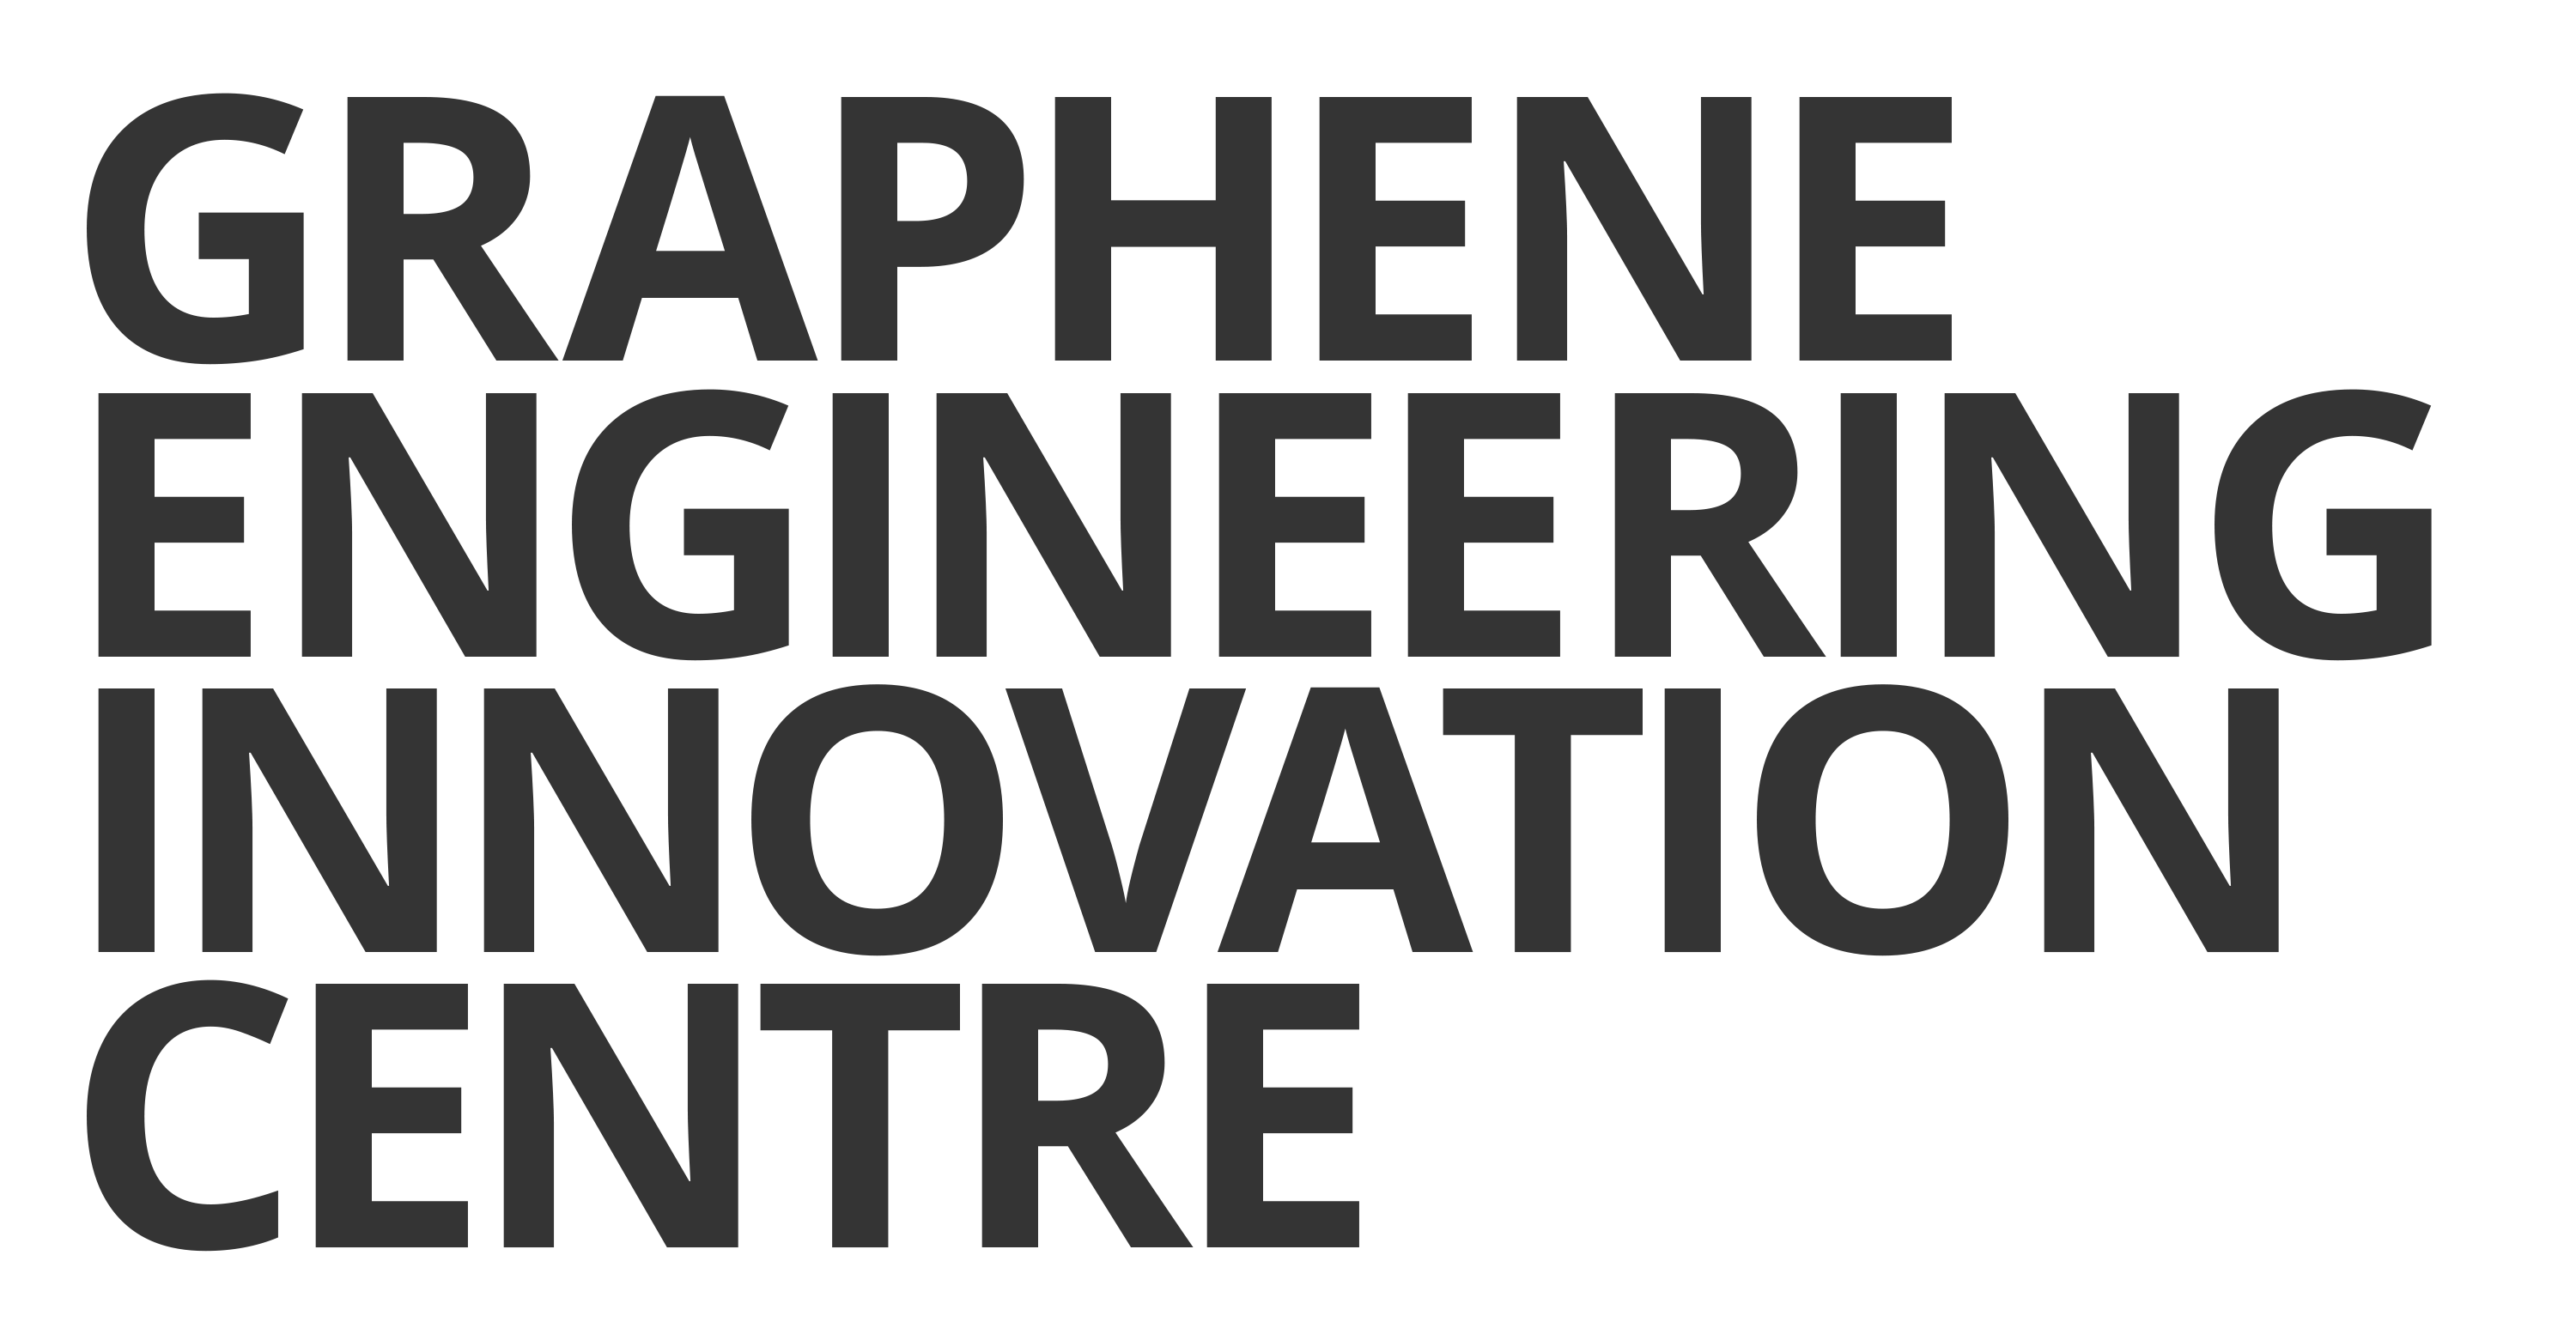 Graphene Engineering and Innovation Centre (GEIC)